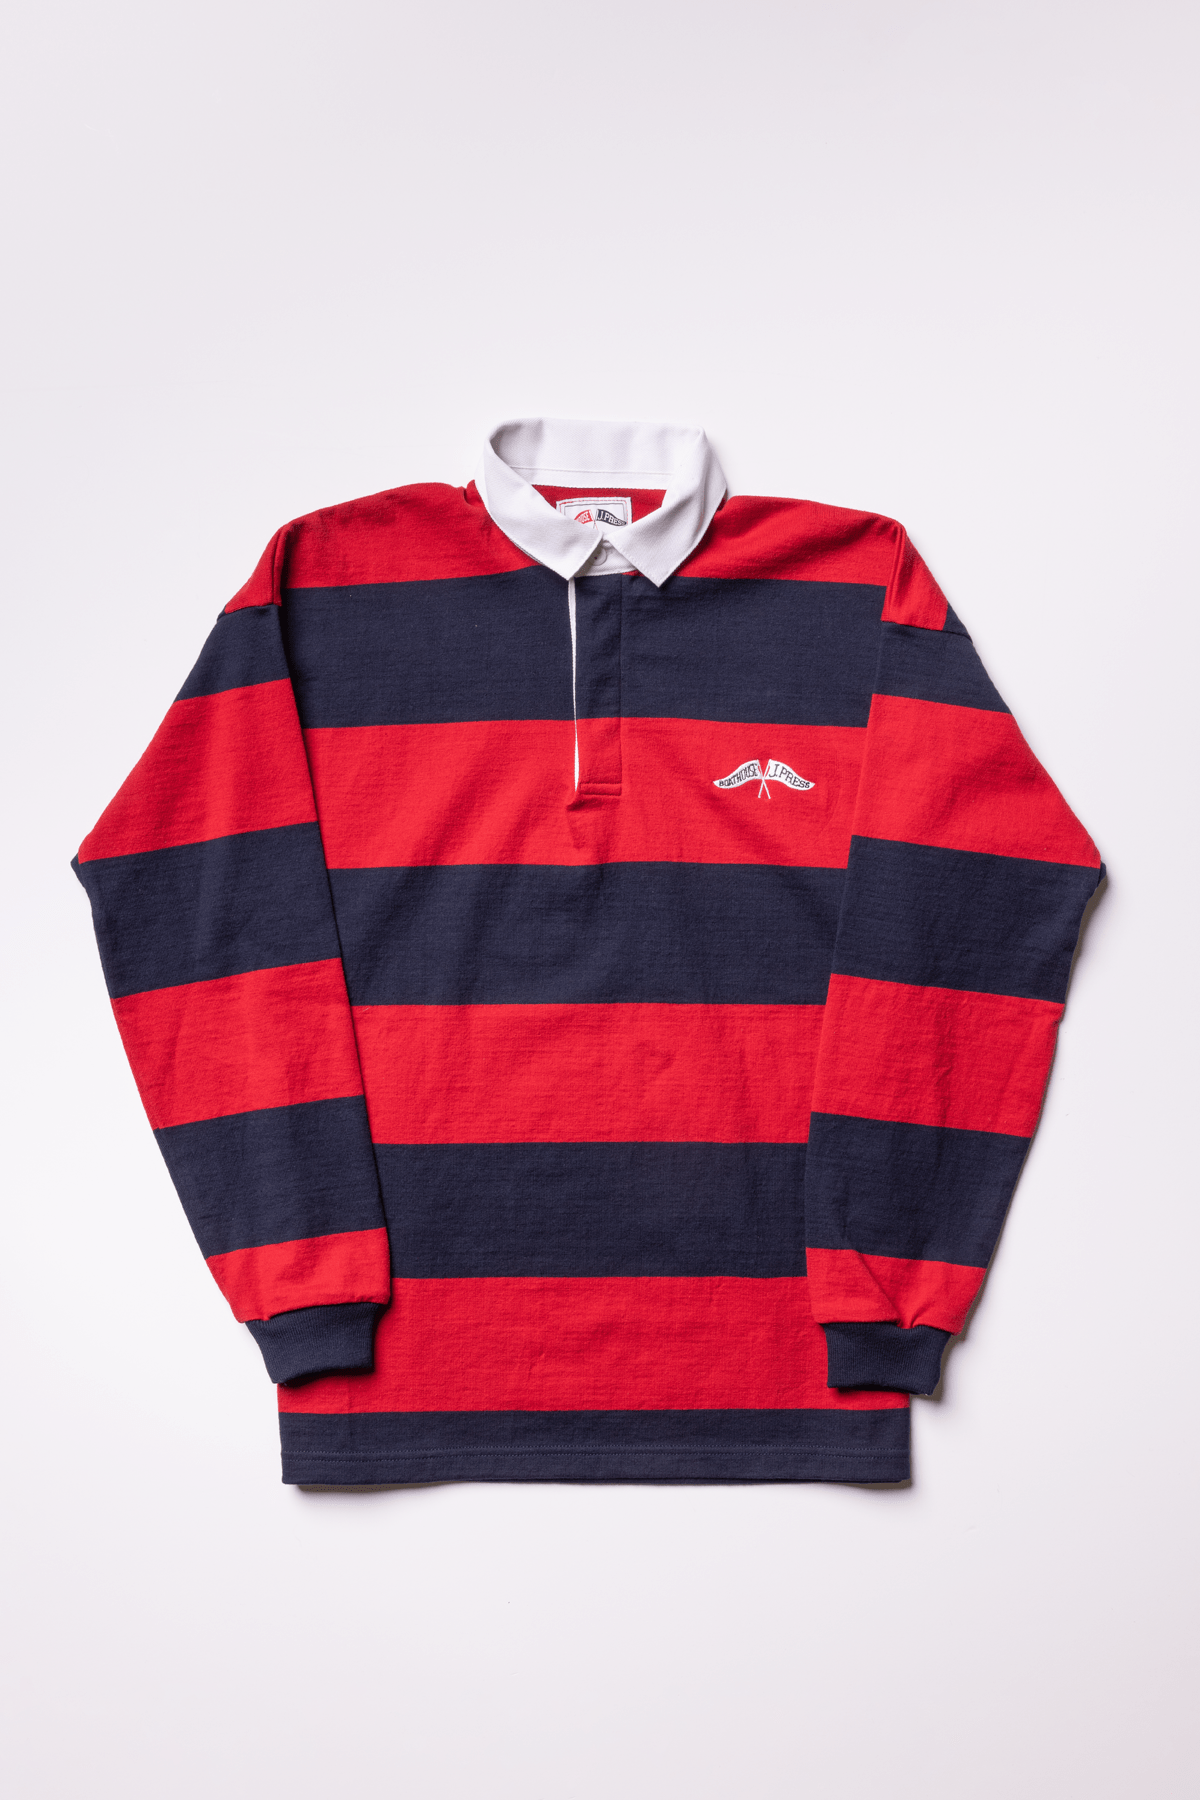 Boathouse x J.Press Rugby Long Sleeve Shirt Red/Navy / Small